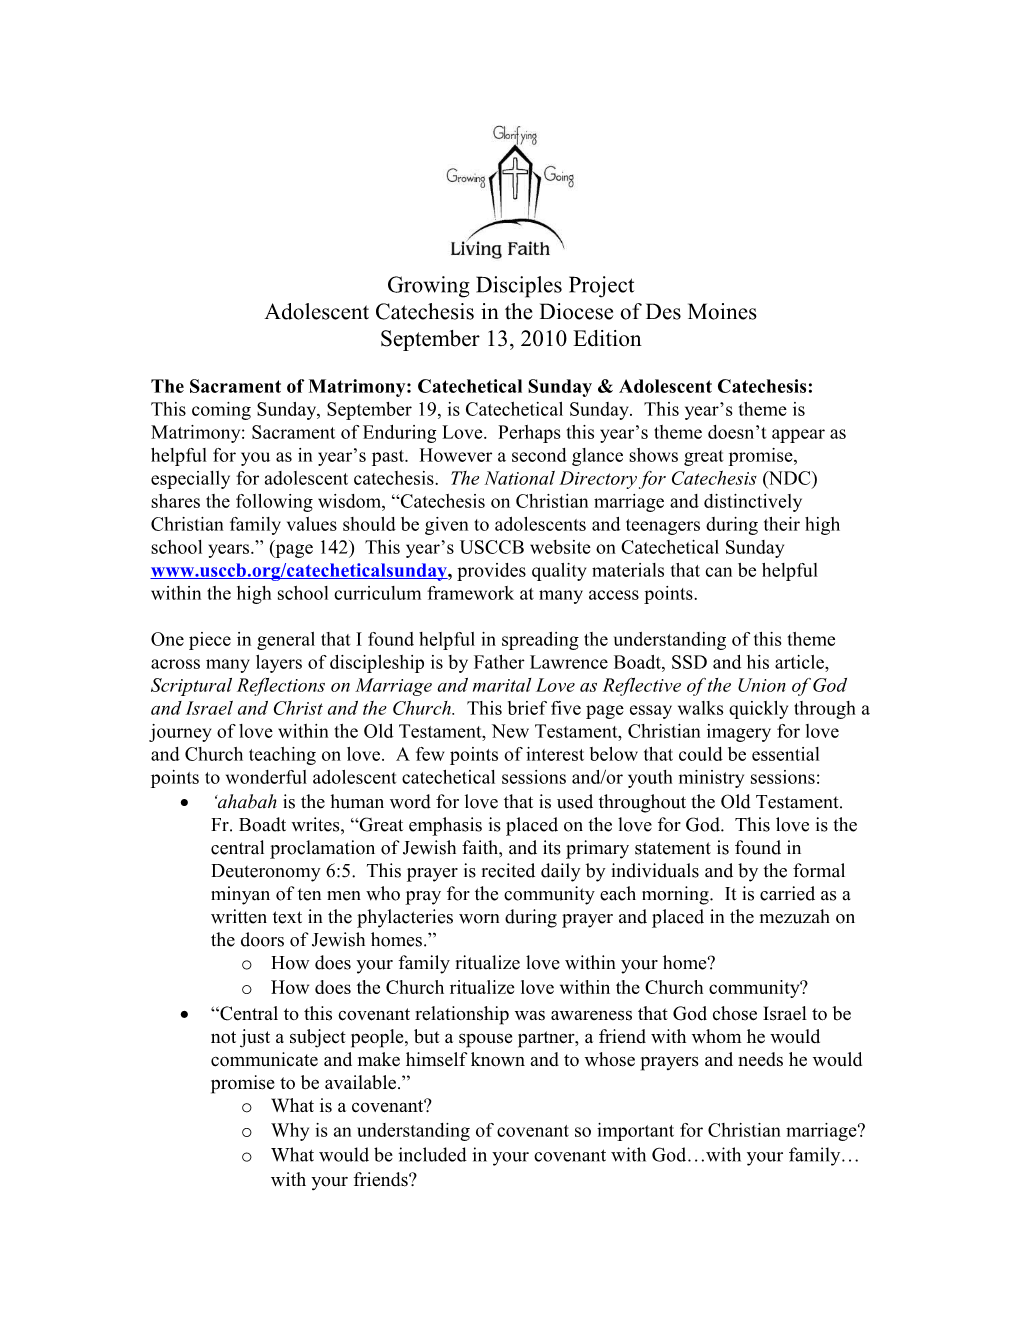 Adolescent Catechesis in the Diocese of Des Moines